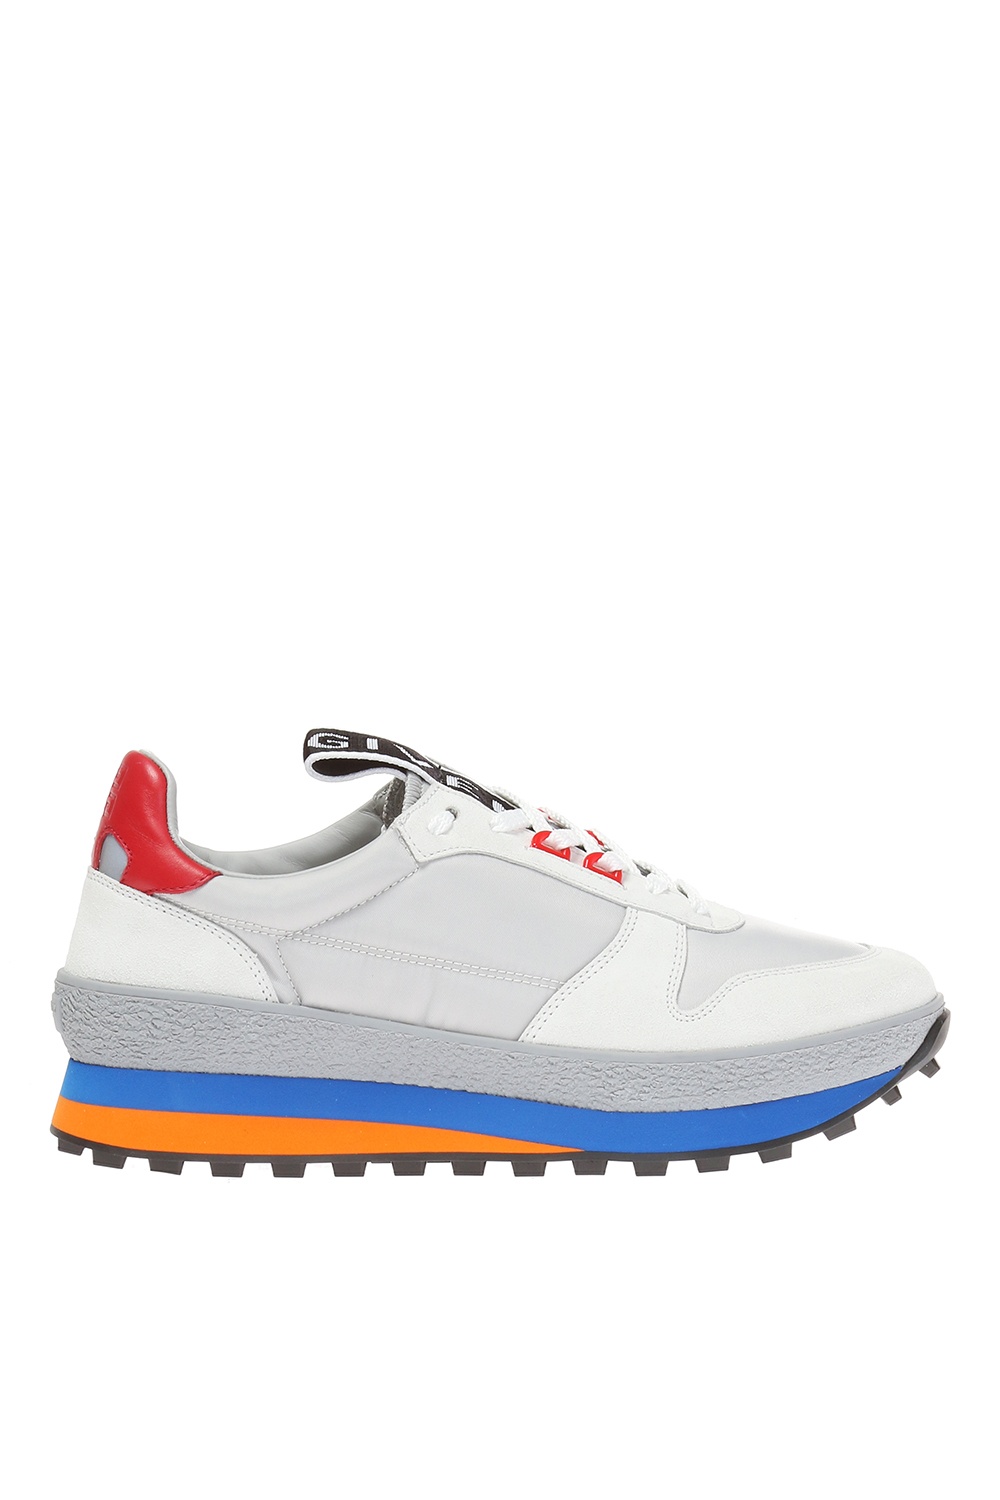 givenchy tr3 runner sneakers